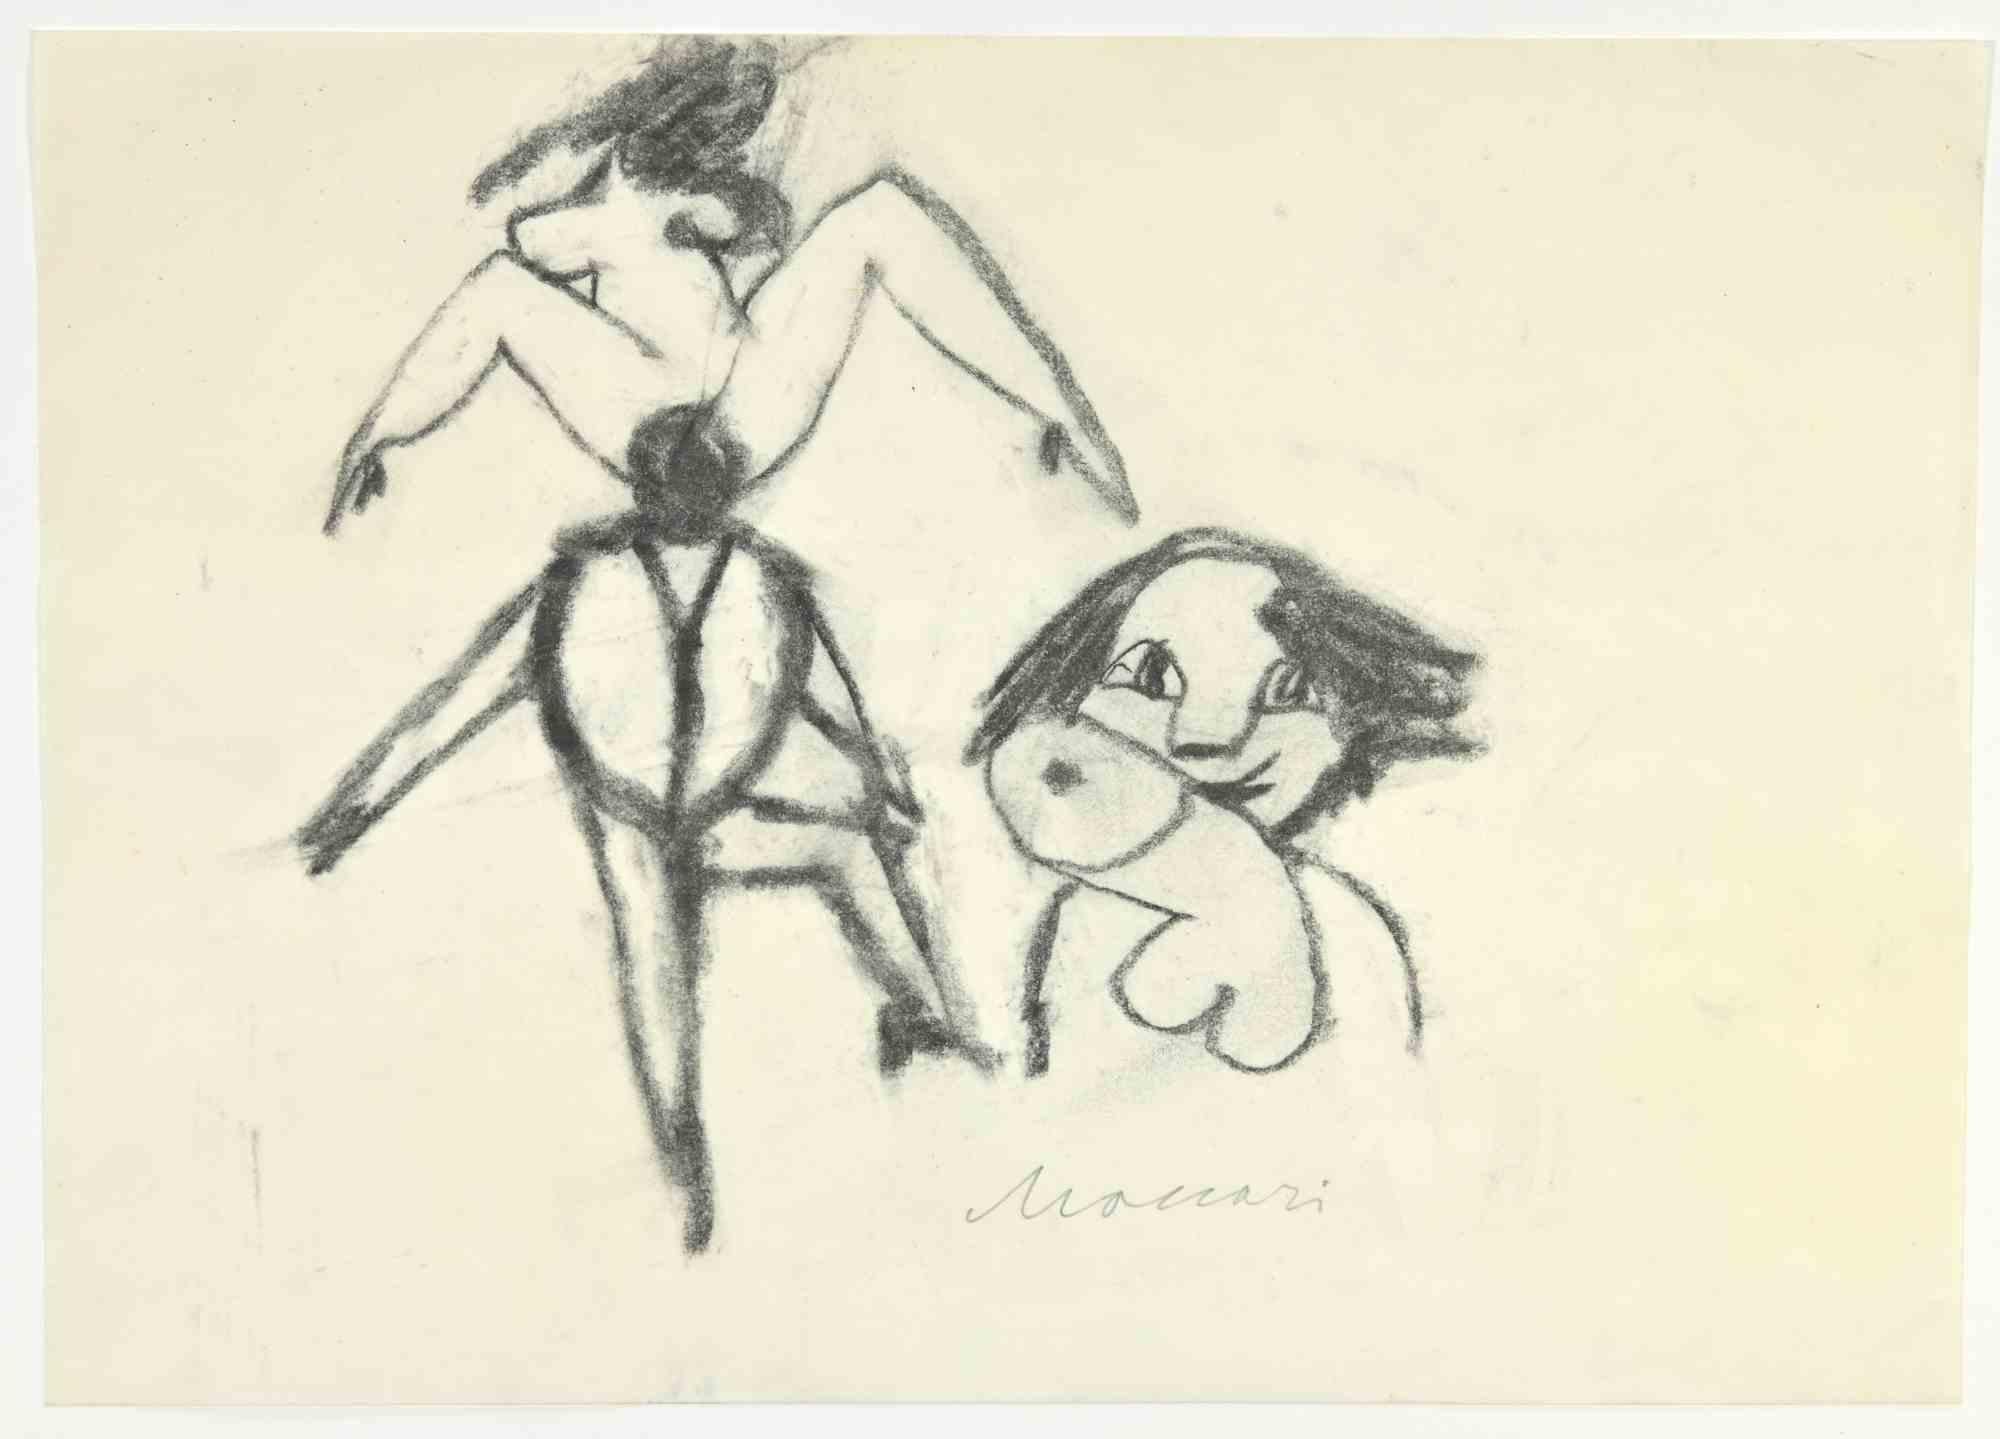 Erotic Scene is a charcoal Drawing realized by Mino Maccari  (1924-1989) in the 1960s.

Hand-signed on the lower.

Good condition.

Mino Maccari (Siena, 1924-Rome, June 16, 1989) was an Italian writer, painter, engraver and journalist, winner of the